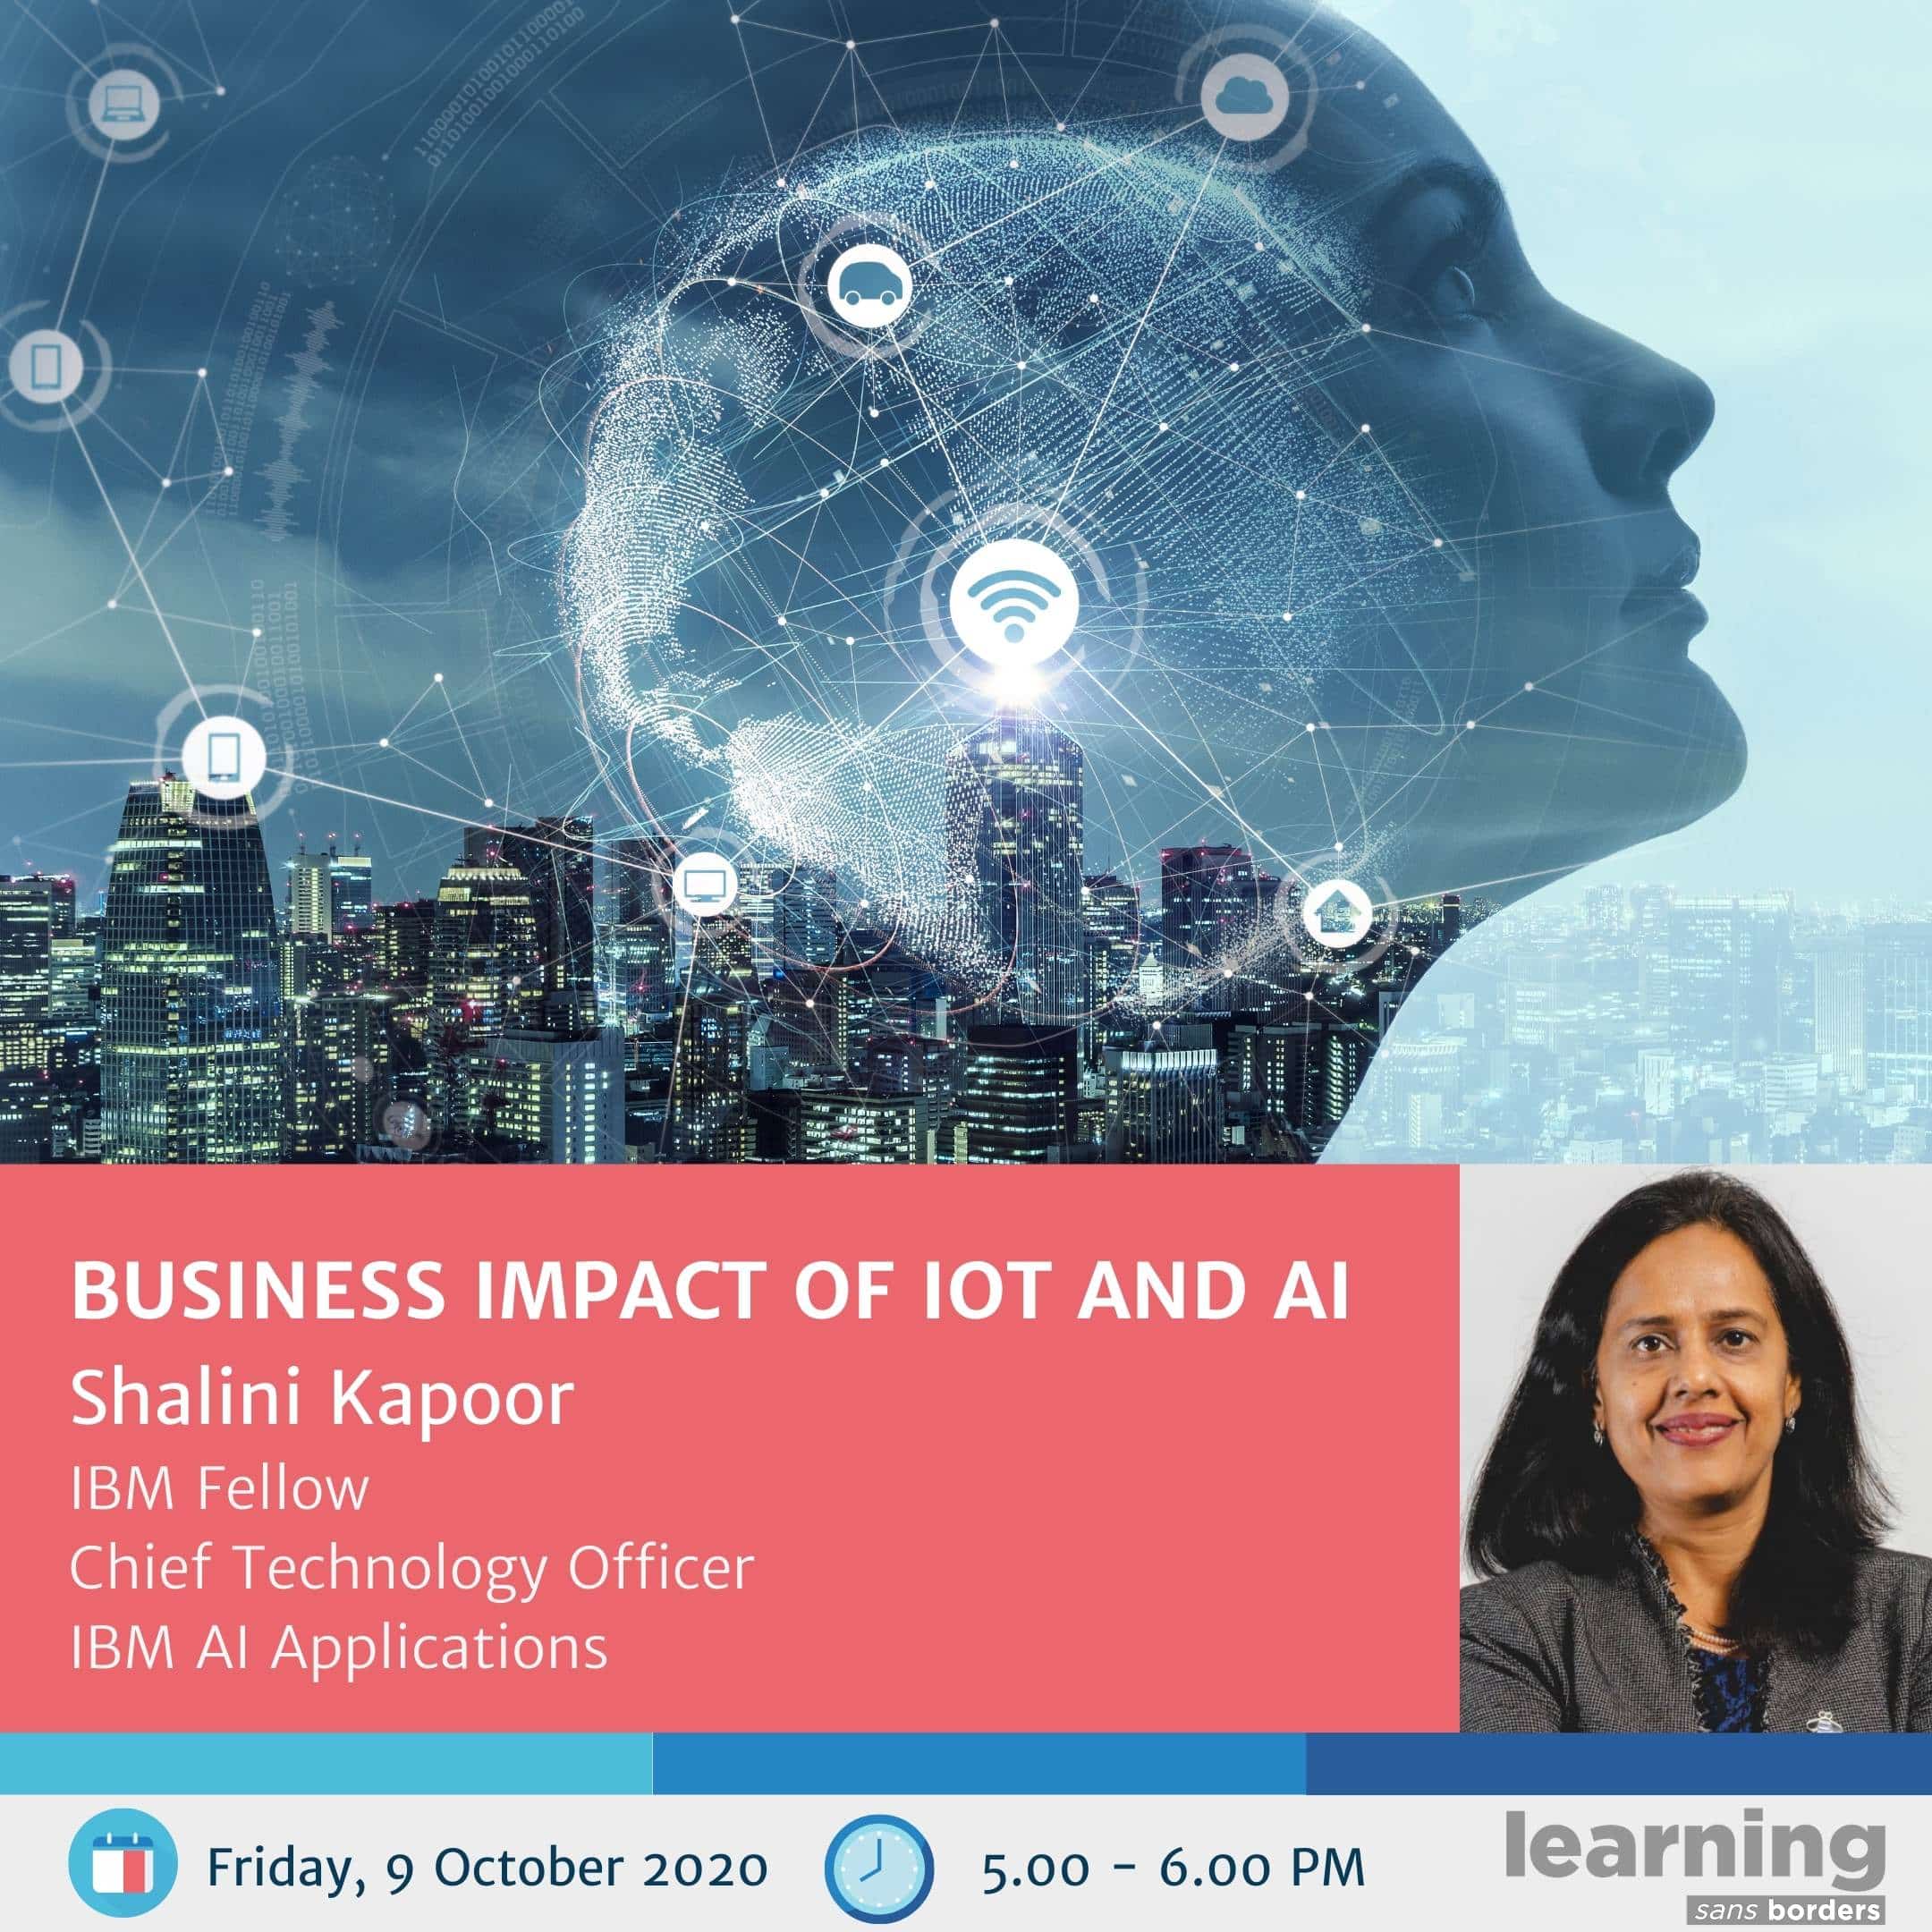 Business Impact of IoT and AI